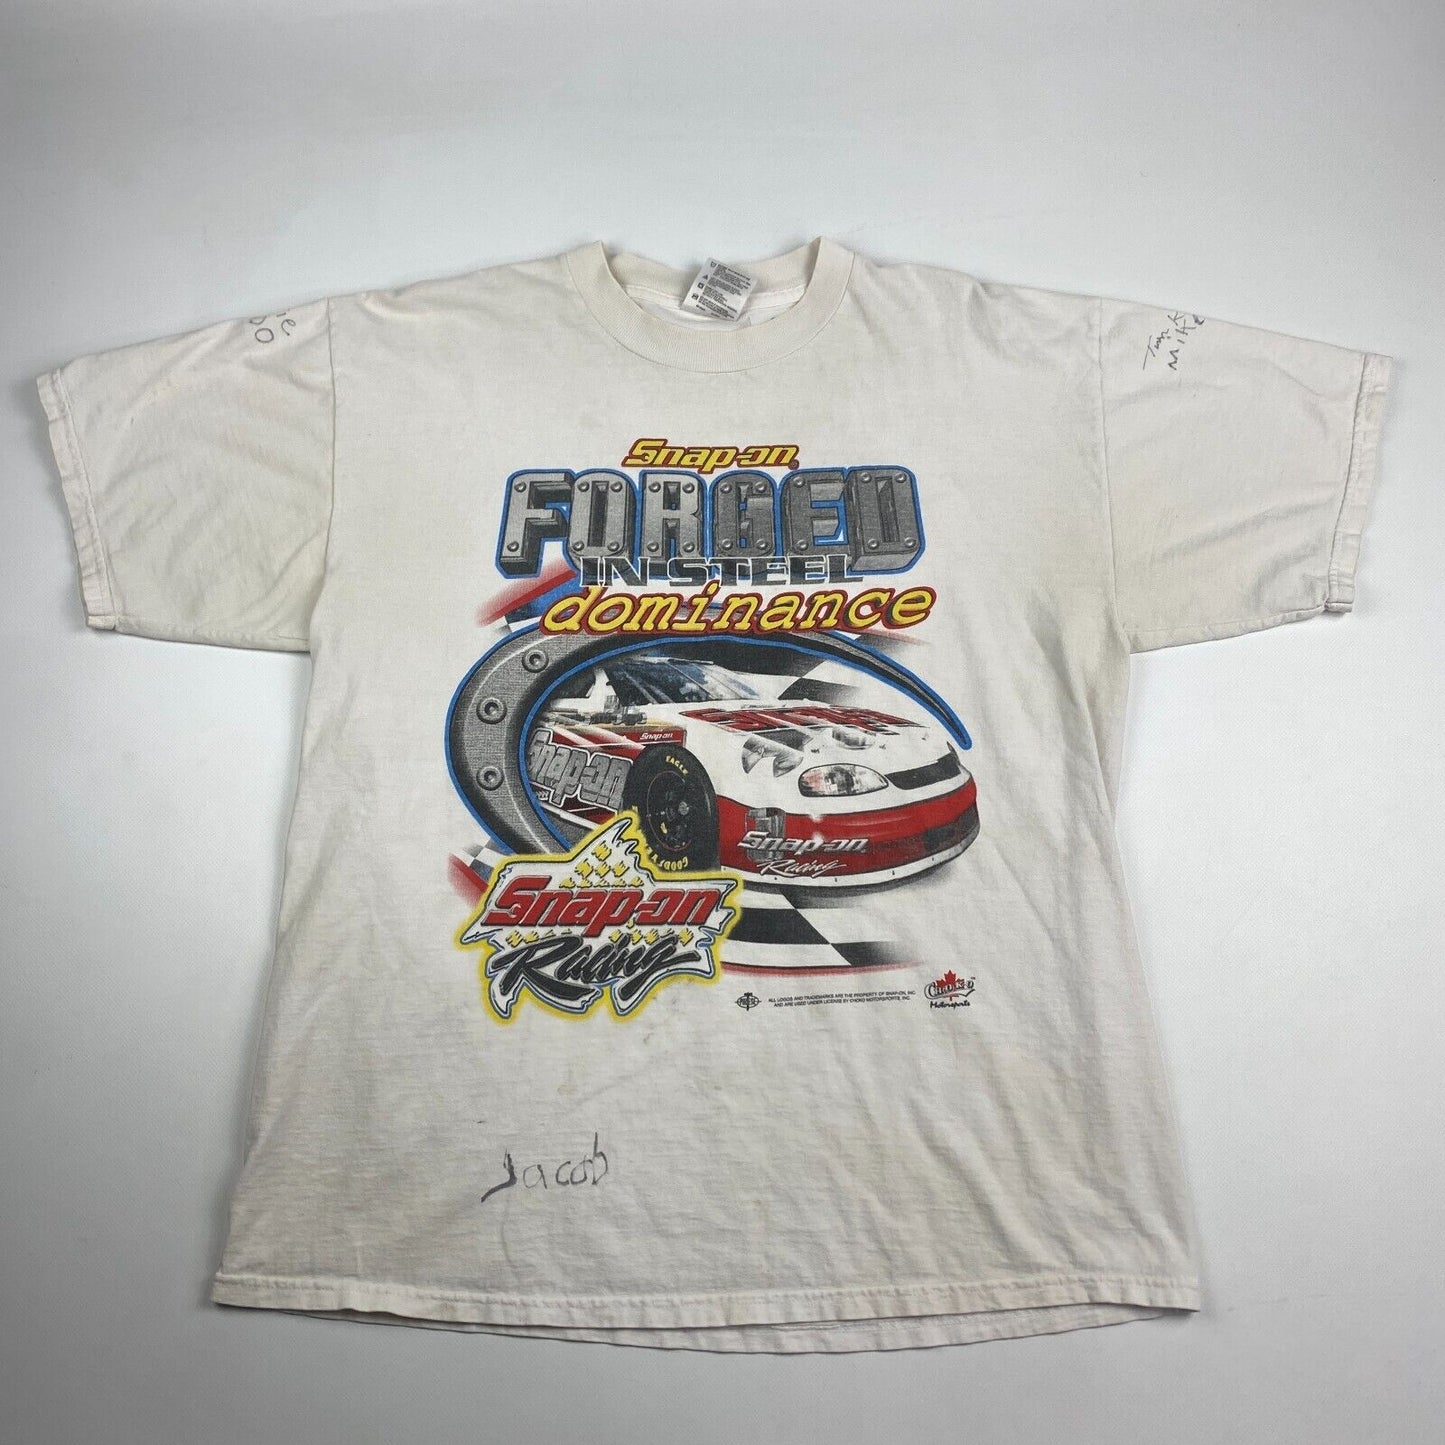 VINTAGE Nascar Snap-on Racing Forged In Steel White T-Shirt sz XL Men